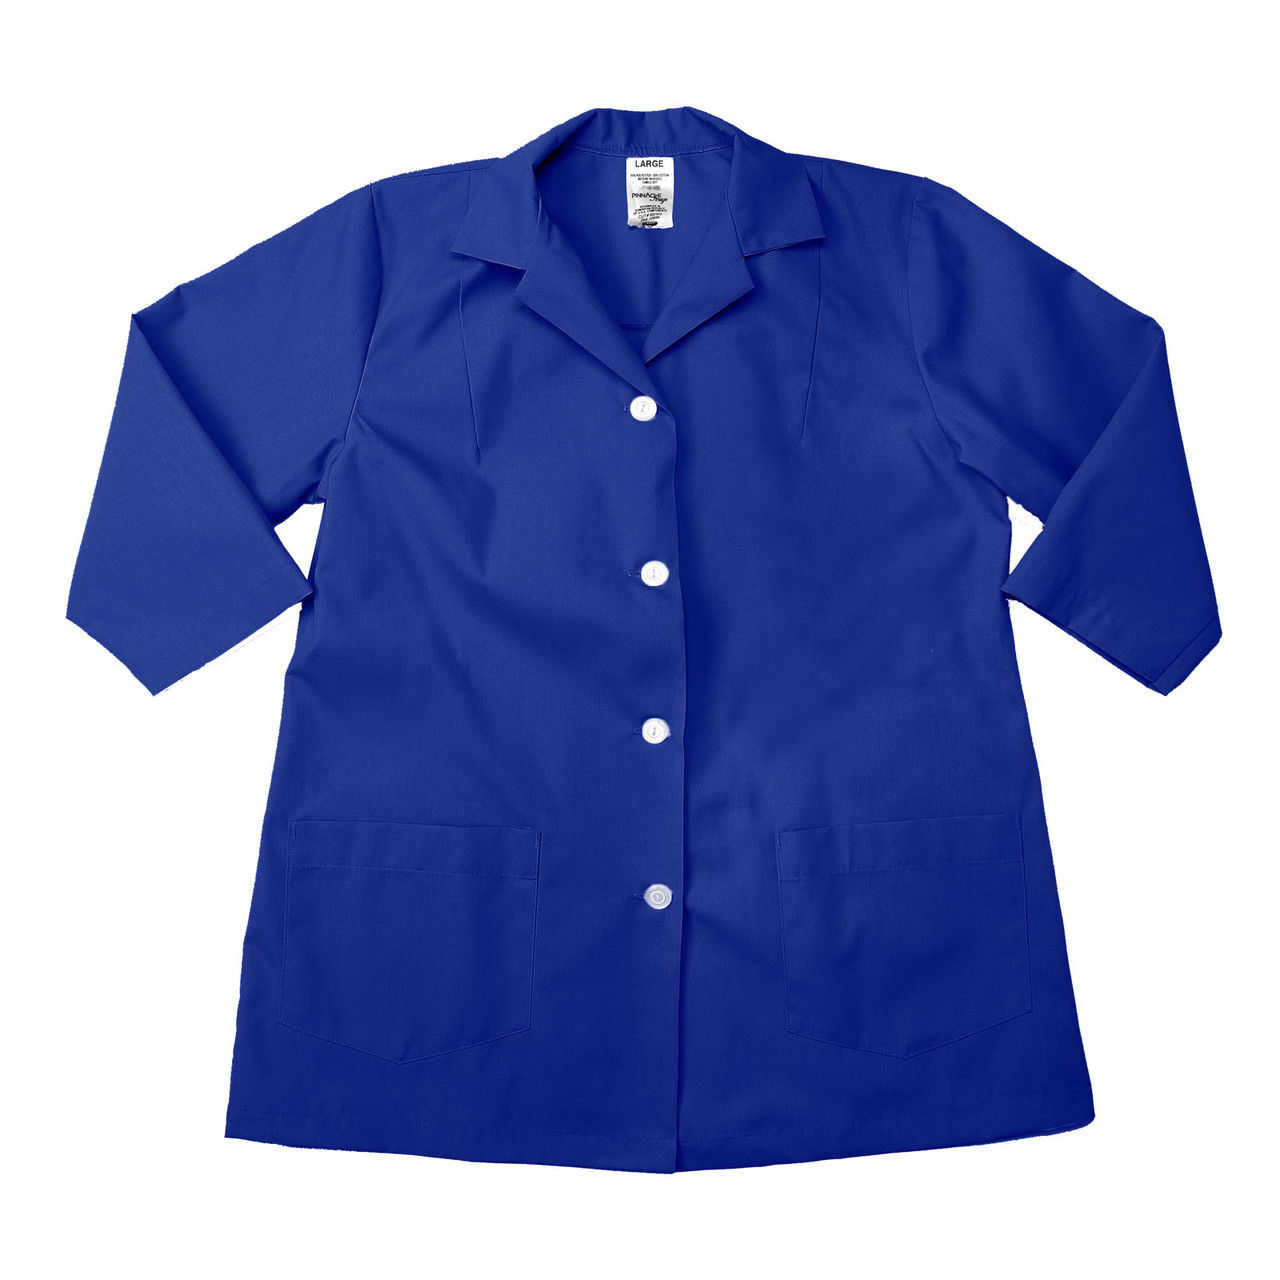 Women's Utility Smock, Royal Blue Questions & Answers